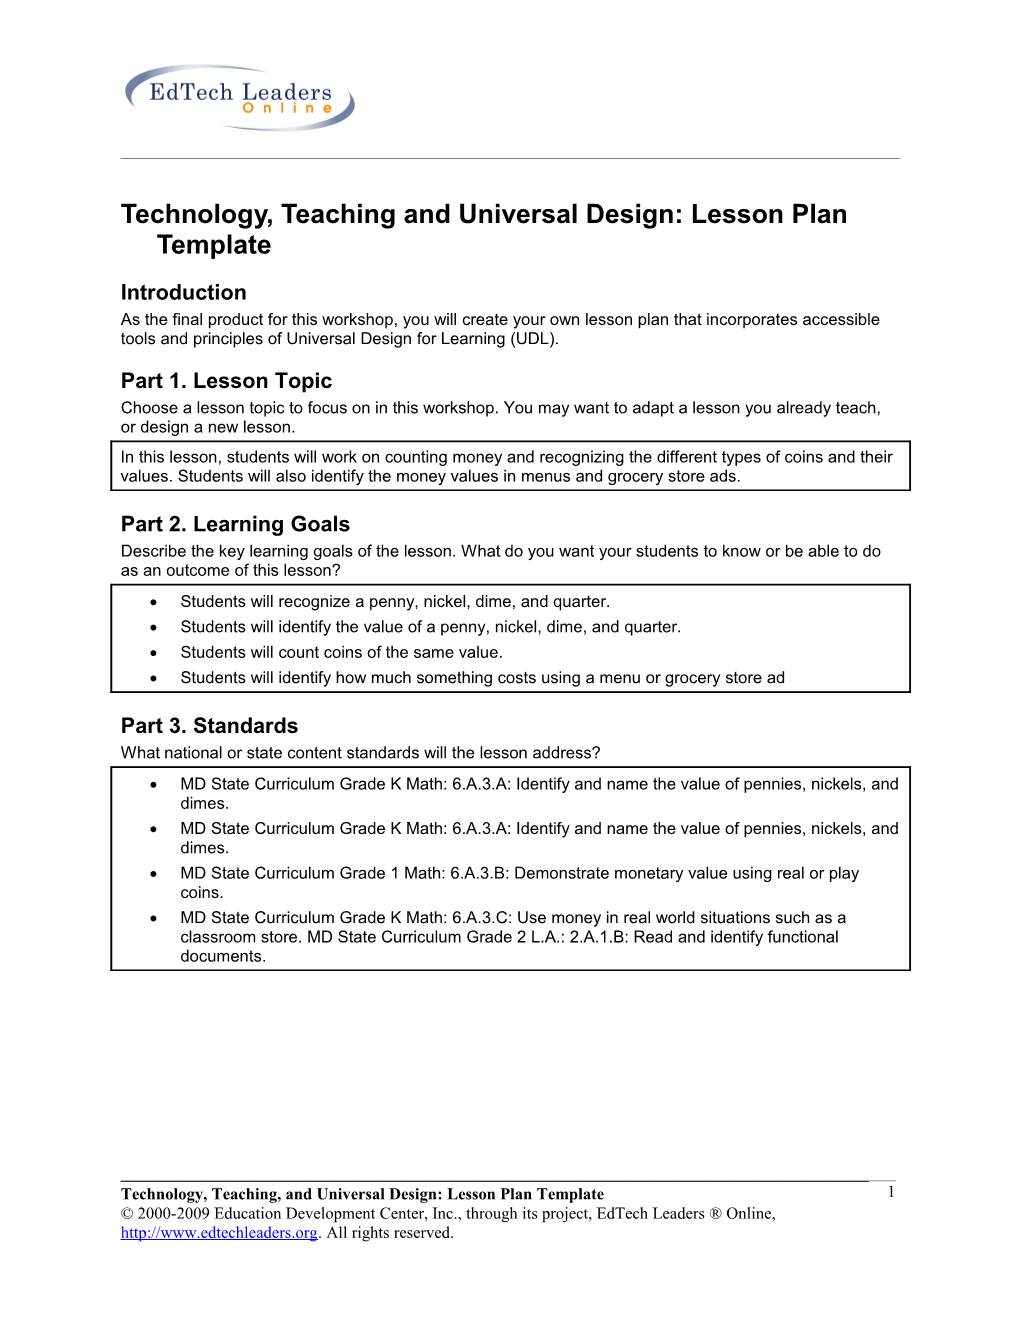 Approaches and Tools for Developing Web-Enhanced Lessons